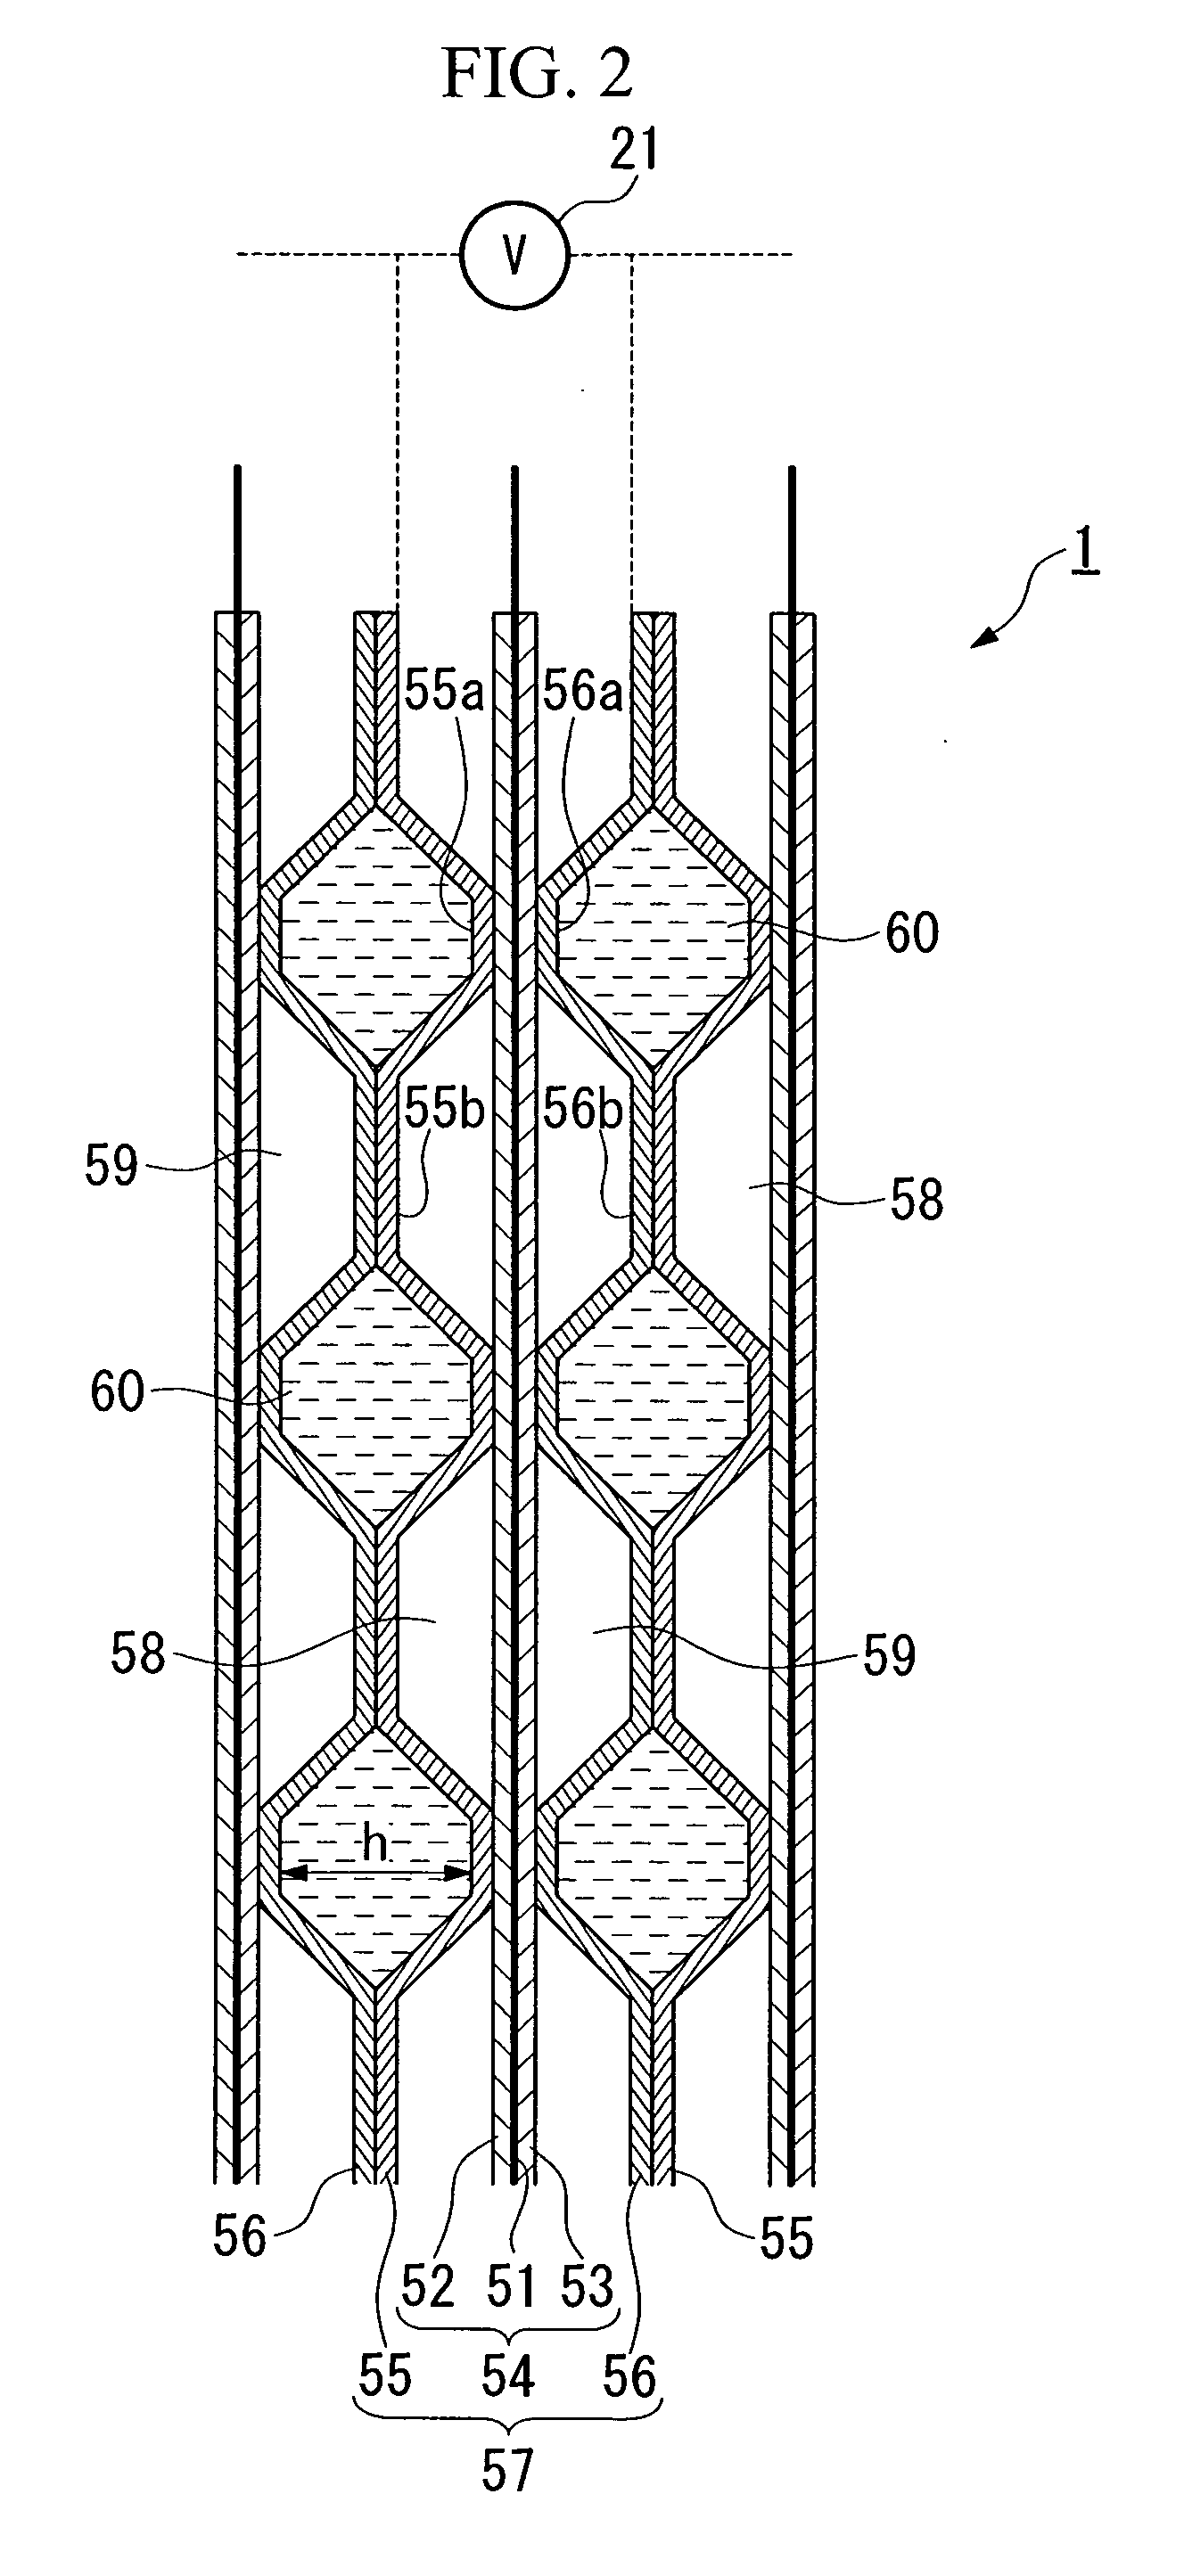 Method and system for starting up fuel cell stack at subzero temperatures, and method of designing fuel cell stack